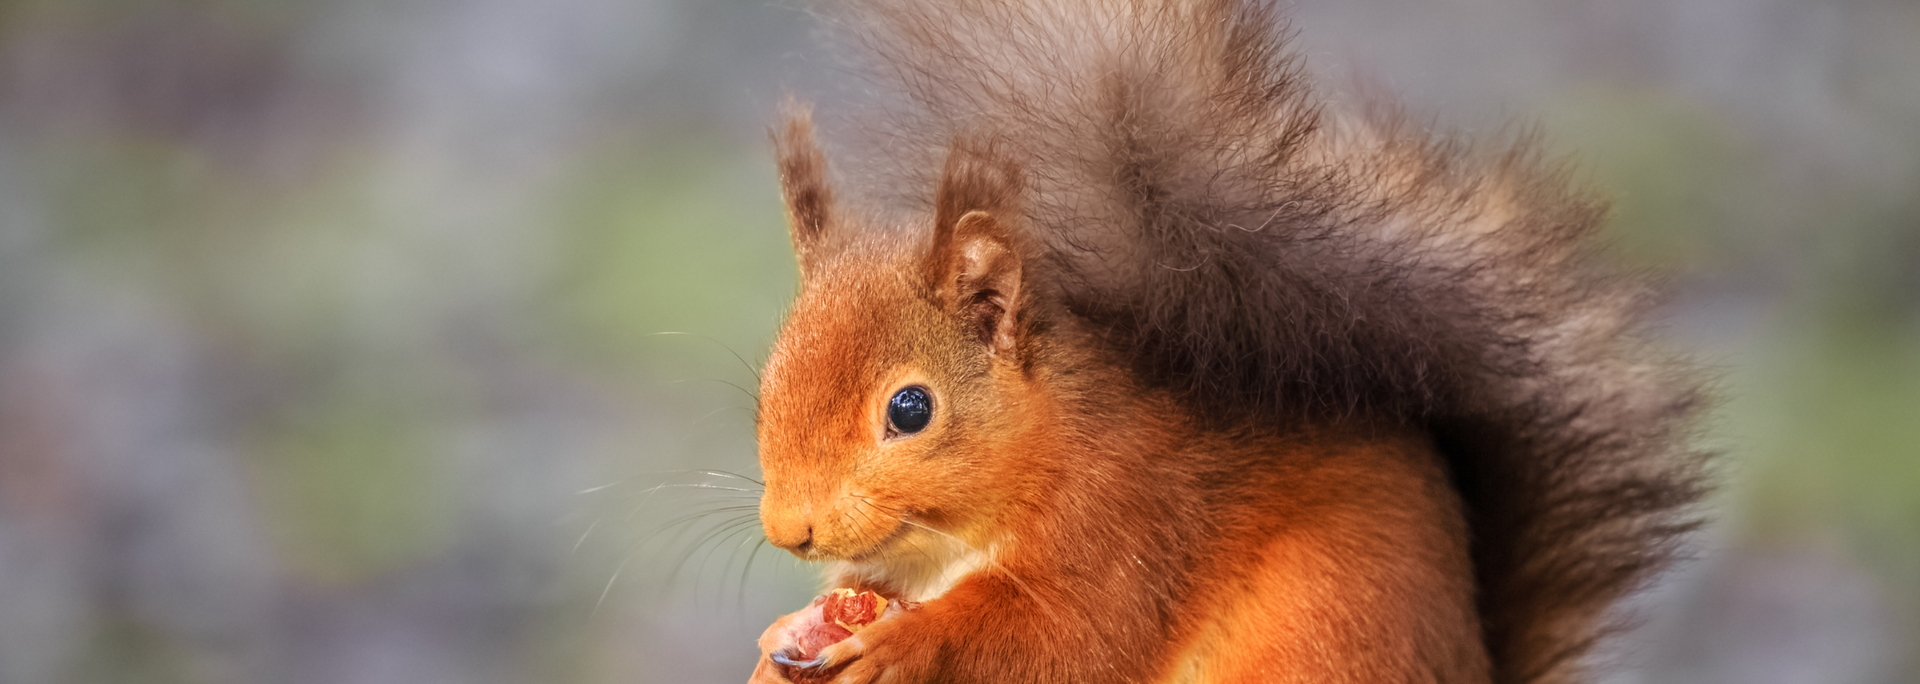 Picture of a red squirrel.